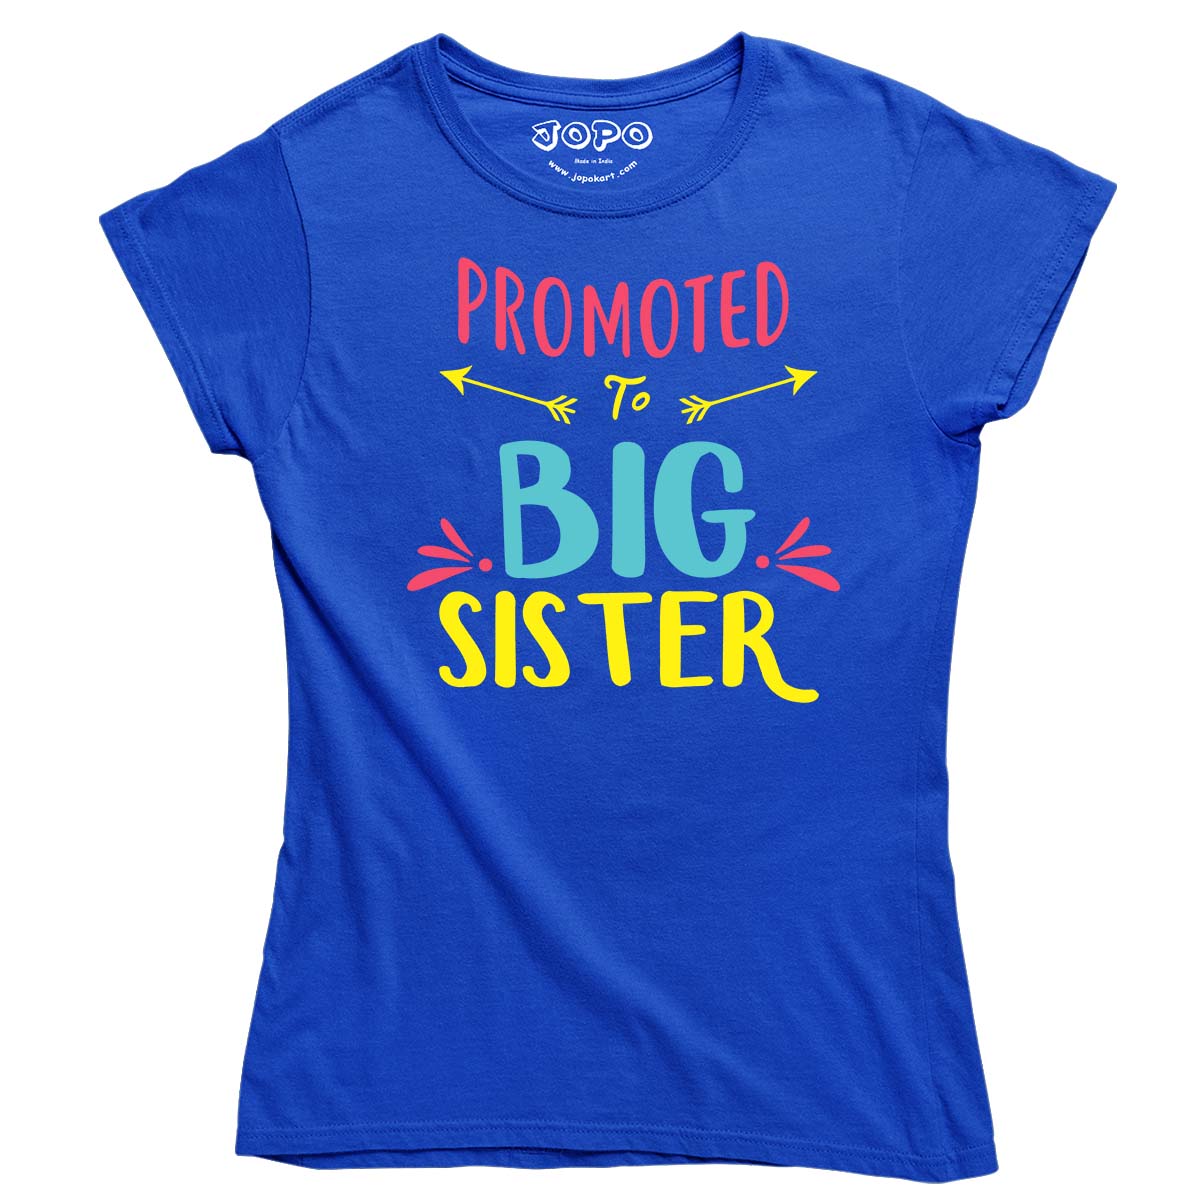 Promoted to big Sister royal blue